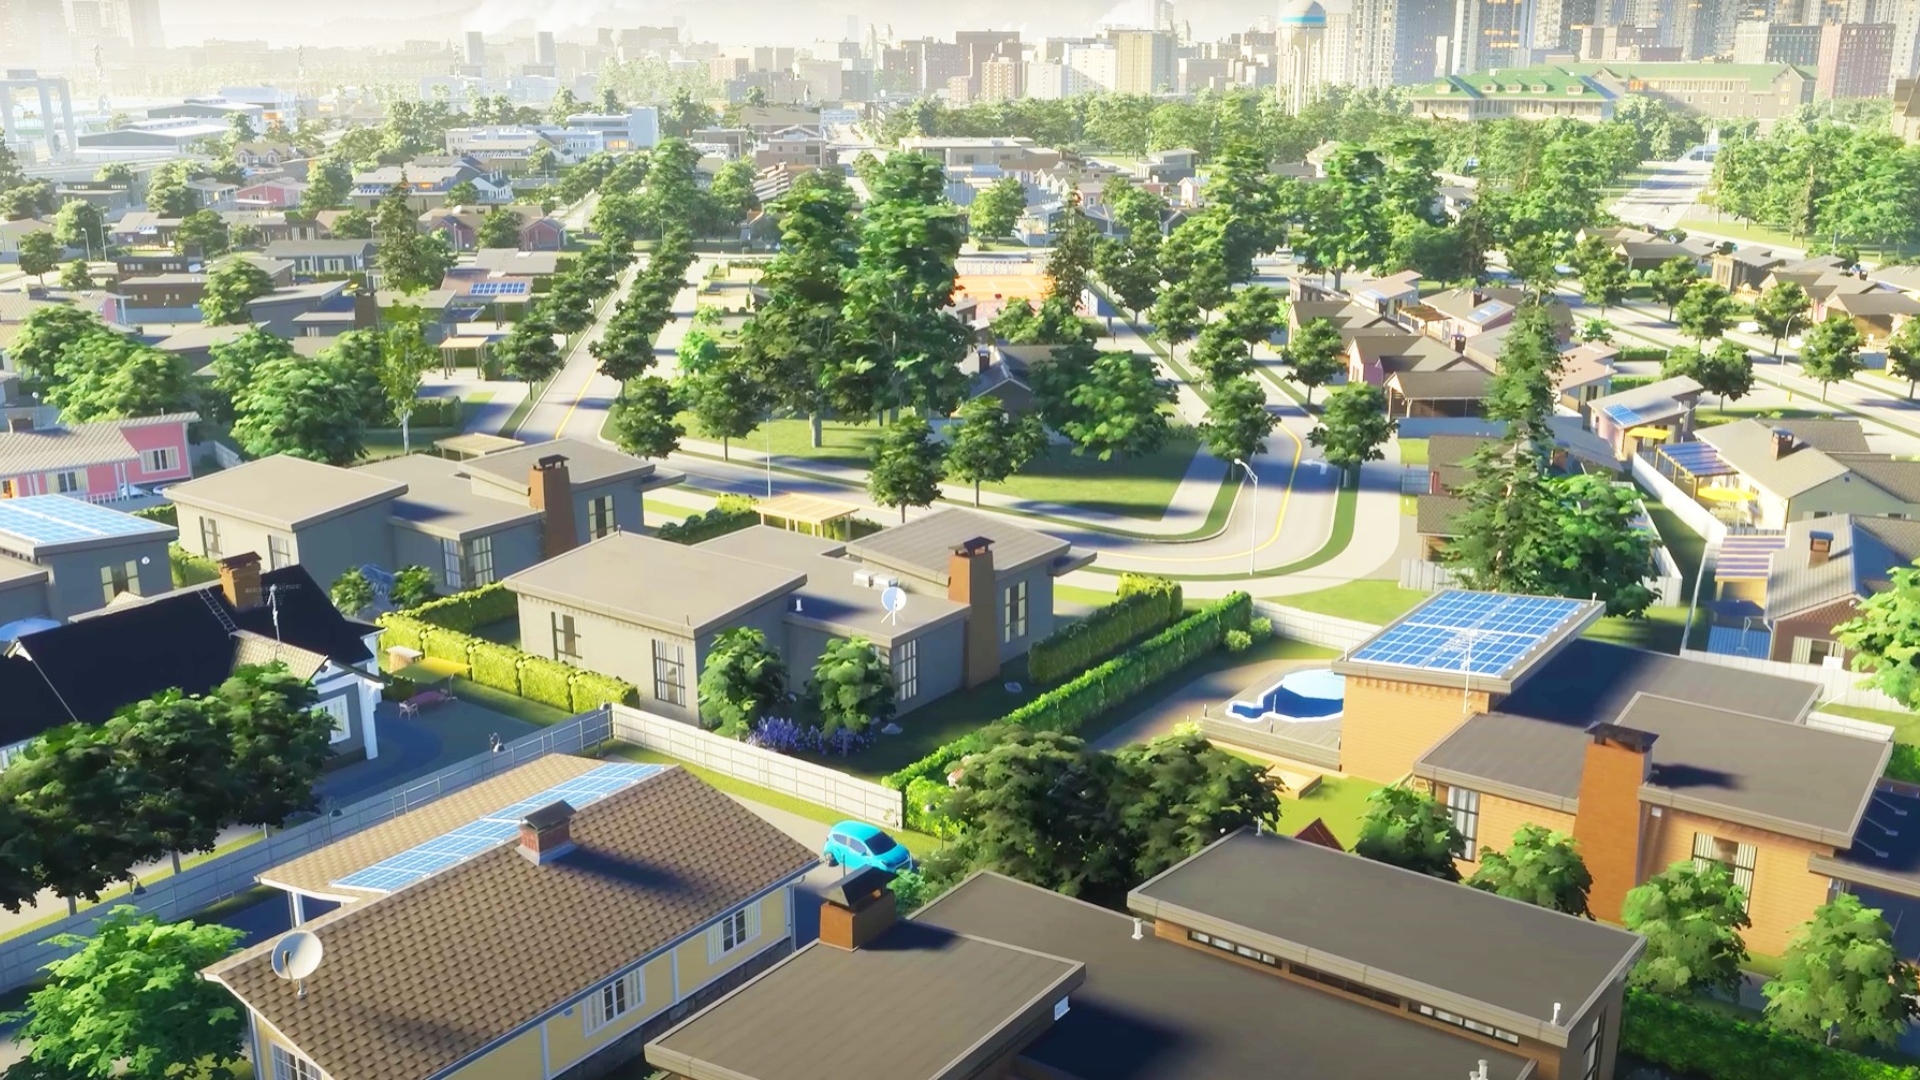 Cities Skylines 2 DLC delayed: A humble suburb from city building game Cities Skylines 2